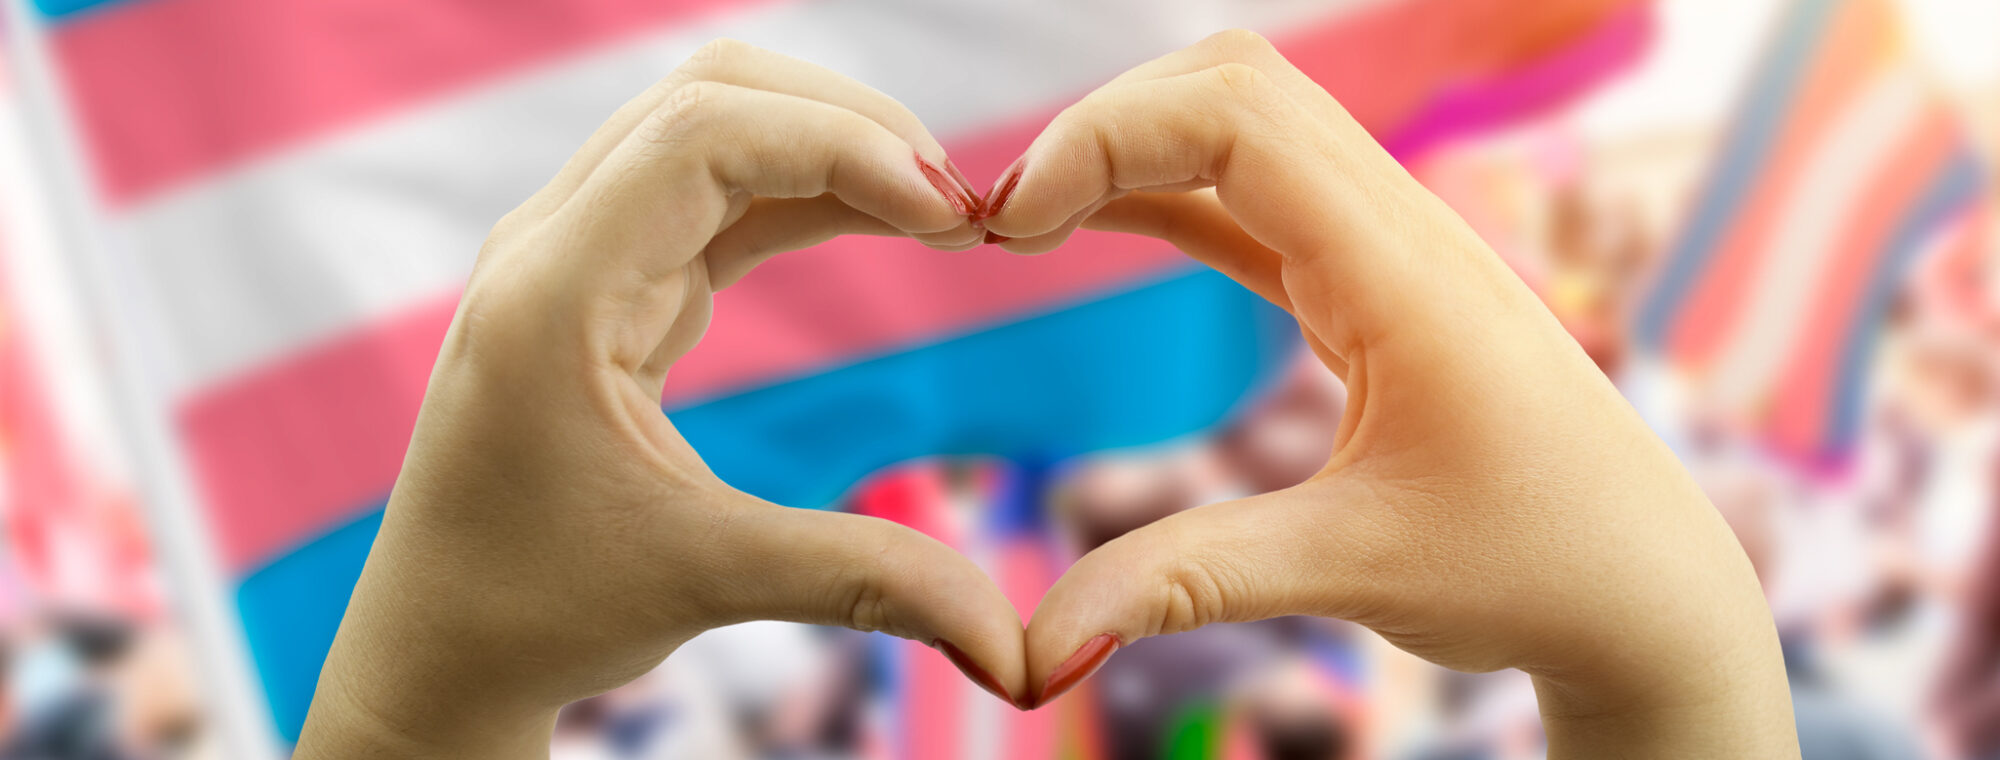 Two hands forming a heart in front of the transgender flag.